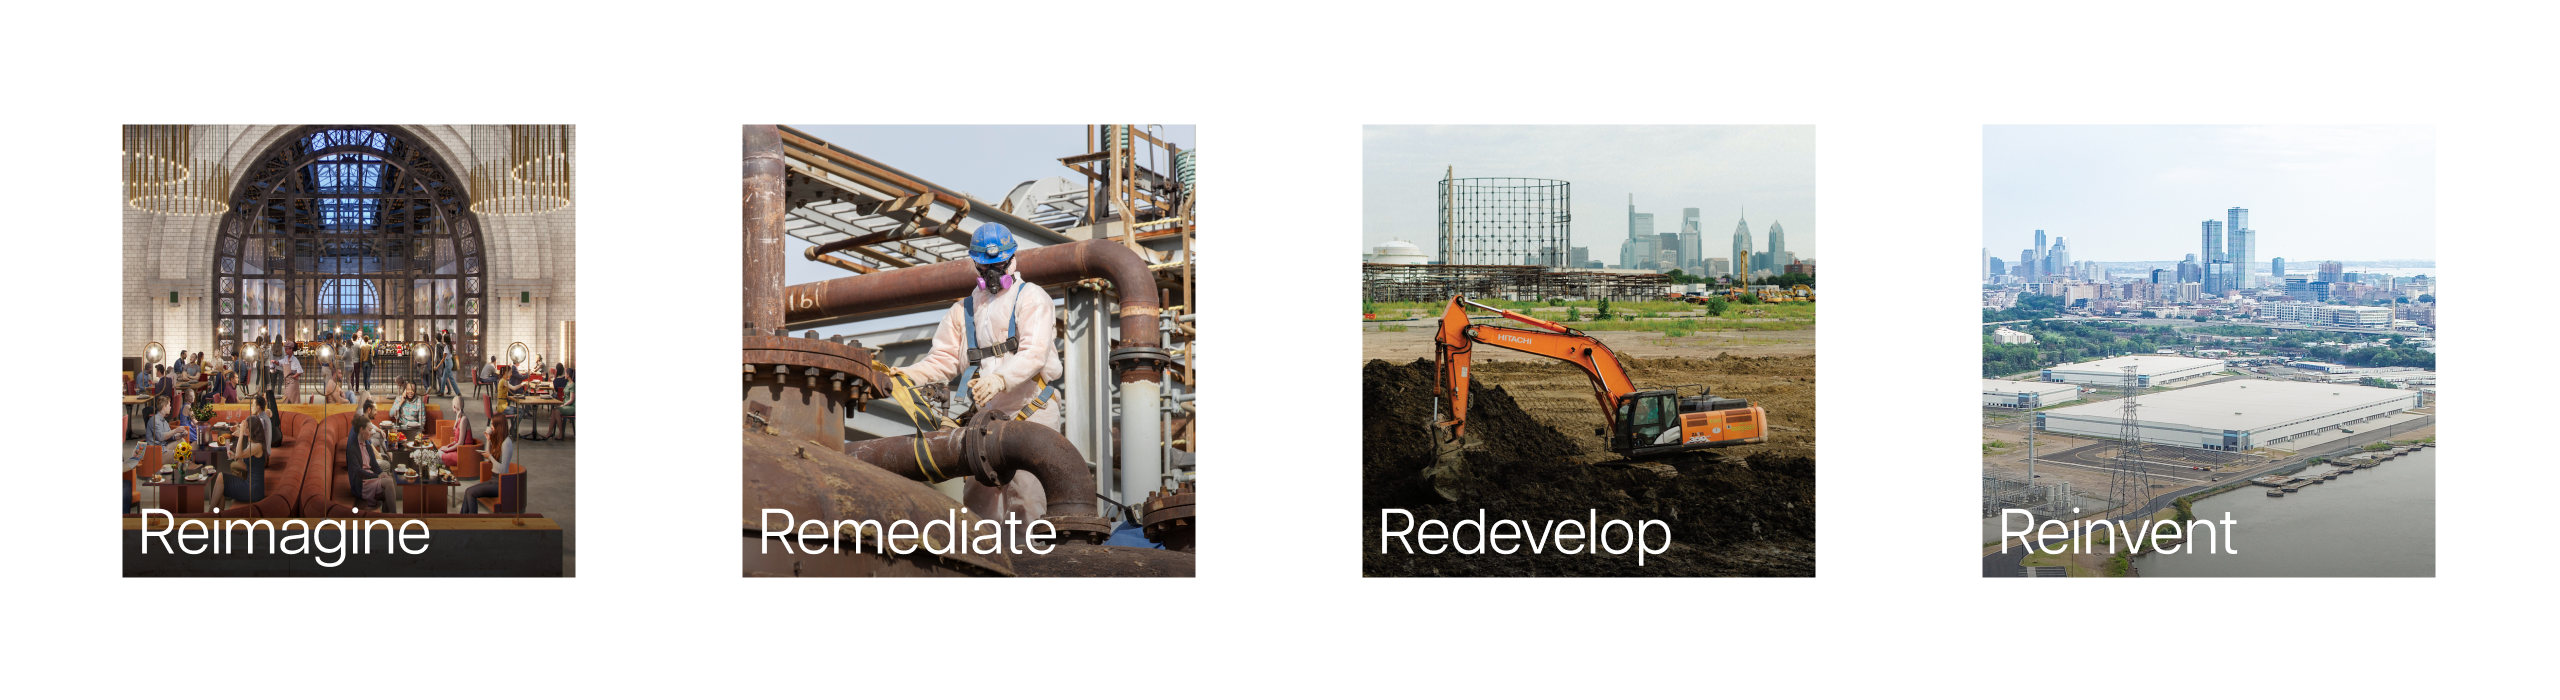 Reimagine, remediate, redevelop and reinvent process graphic